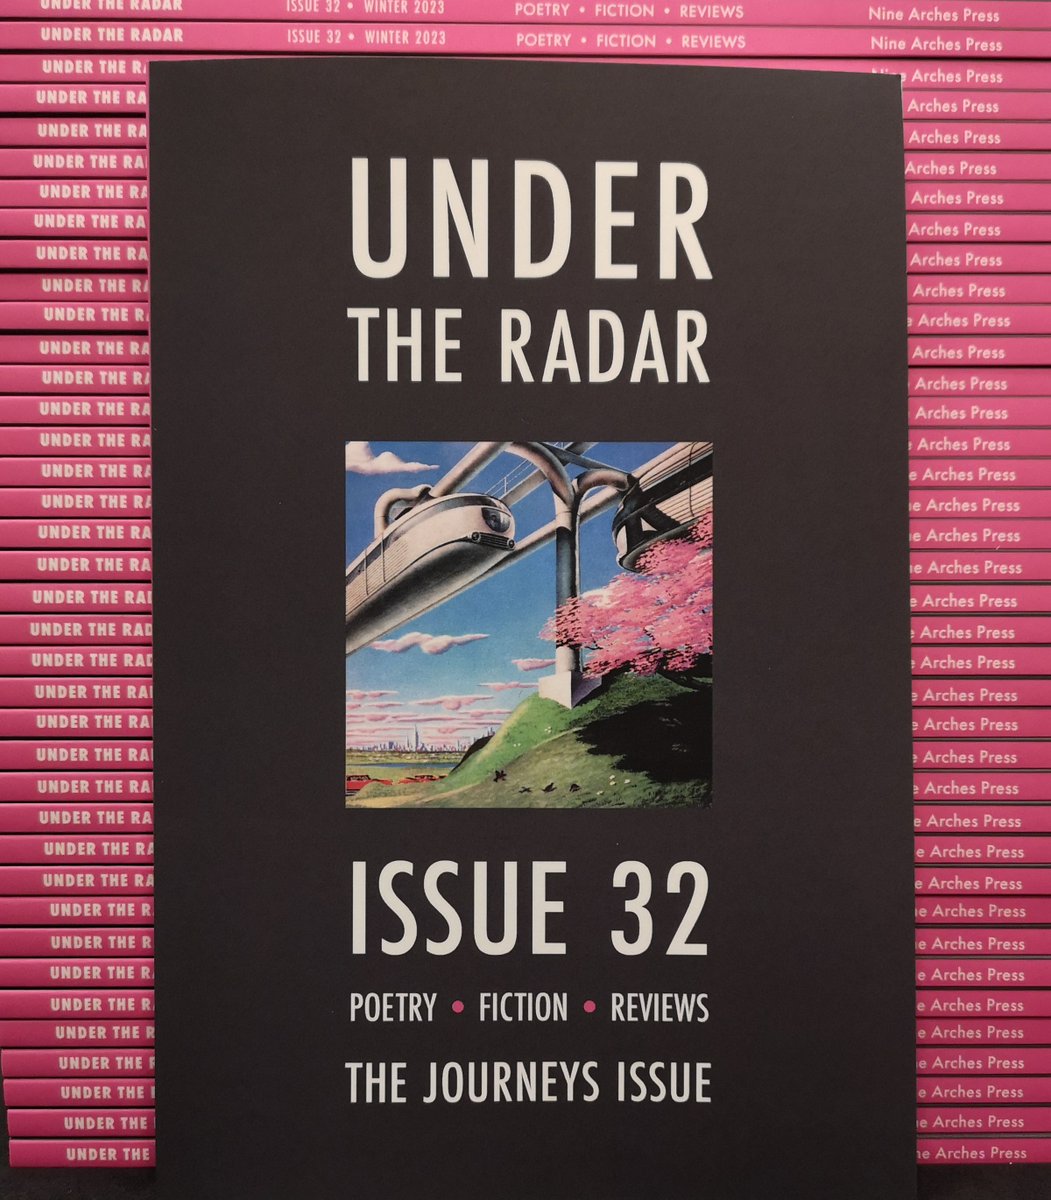 Under The Radar, the Journeys Issue has arrived. Featuring #poetry, short fiction and reviews. What will you discover? Buy a single copy or opt for a subscription: ninearchespress.com/shop#!/Under-t…